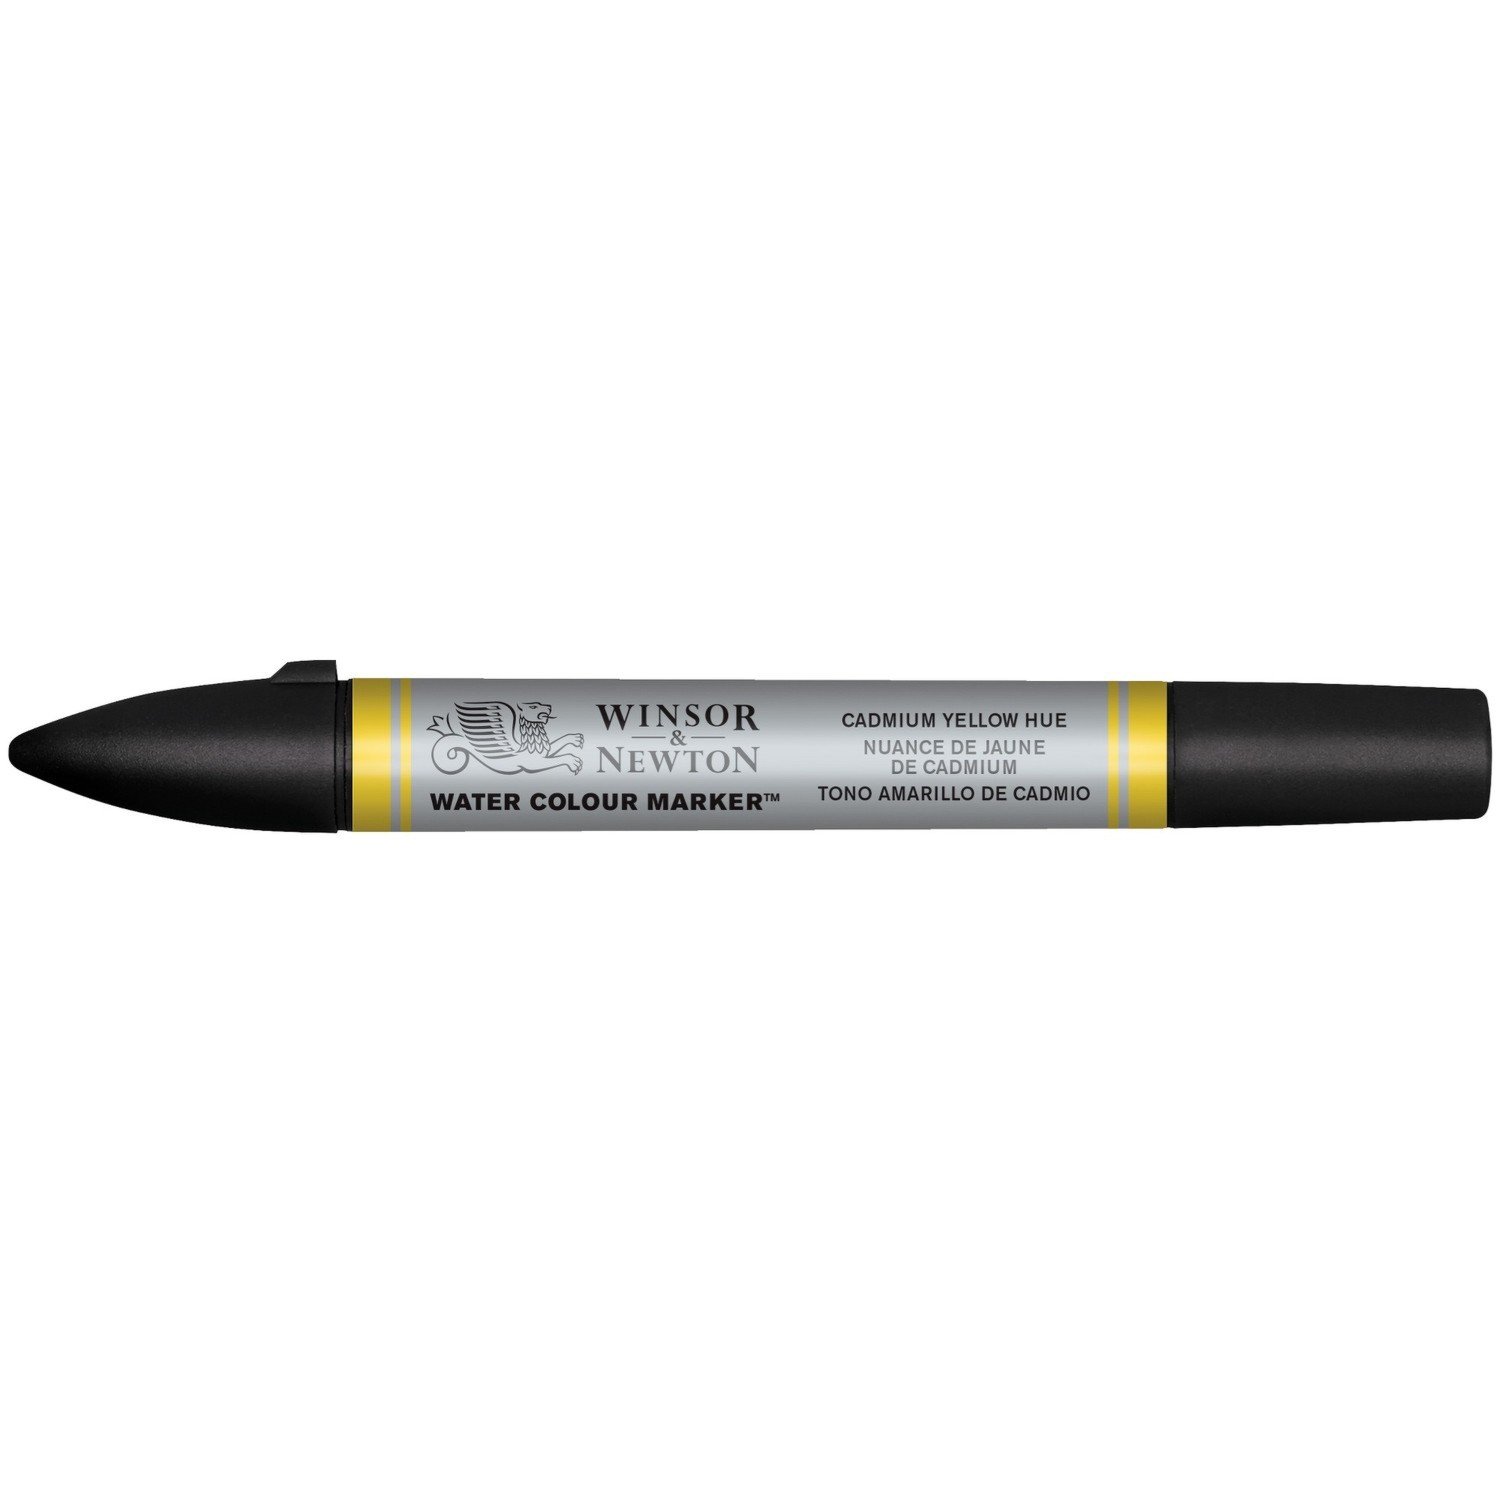 Winsor and Newton Water Colour Marker - Cadmium Yellow Hue Image 1